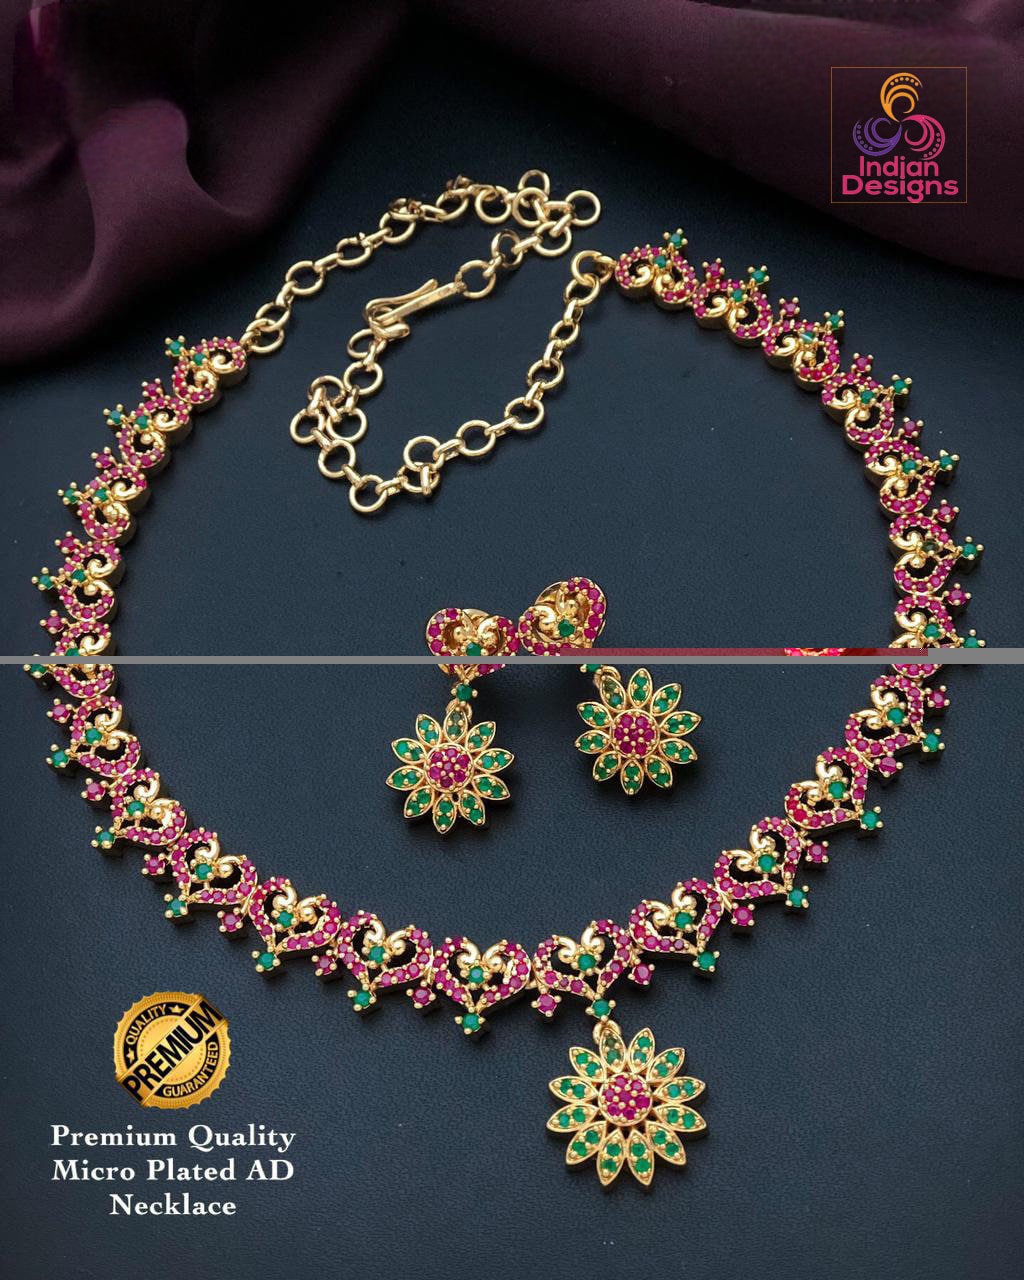 Lightweight 22k Gold Necklace & Earring Sets | Gold necklace designs, Indian  gold jewellery design, Wedding jewellery designs